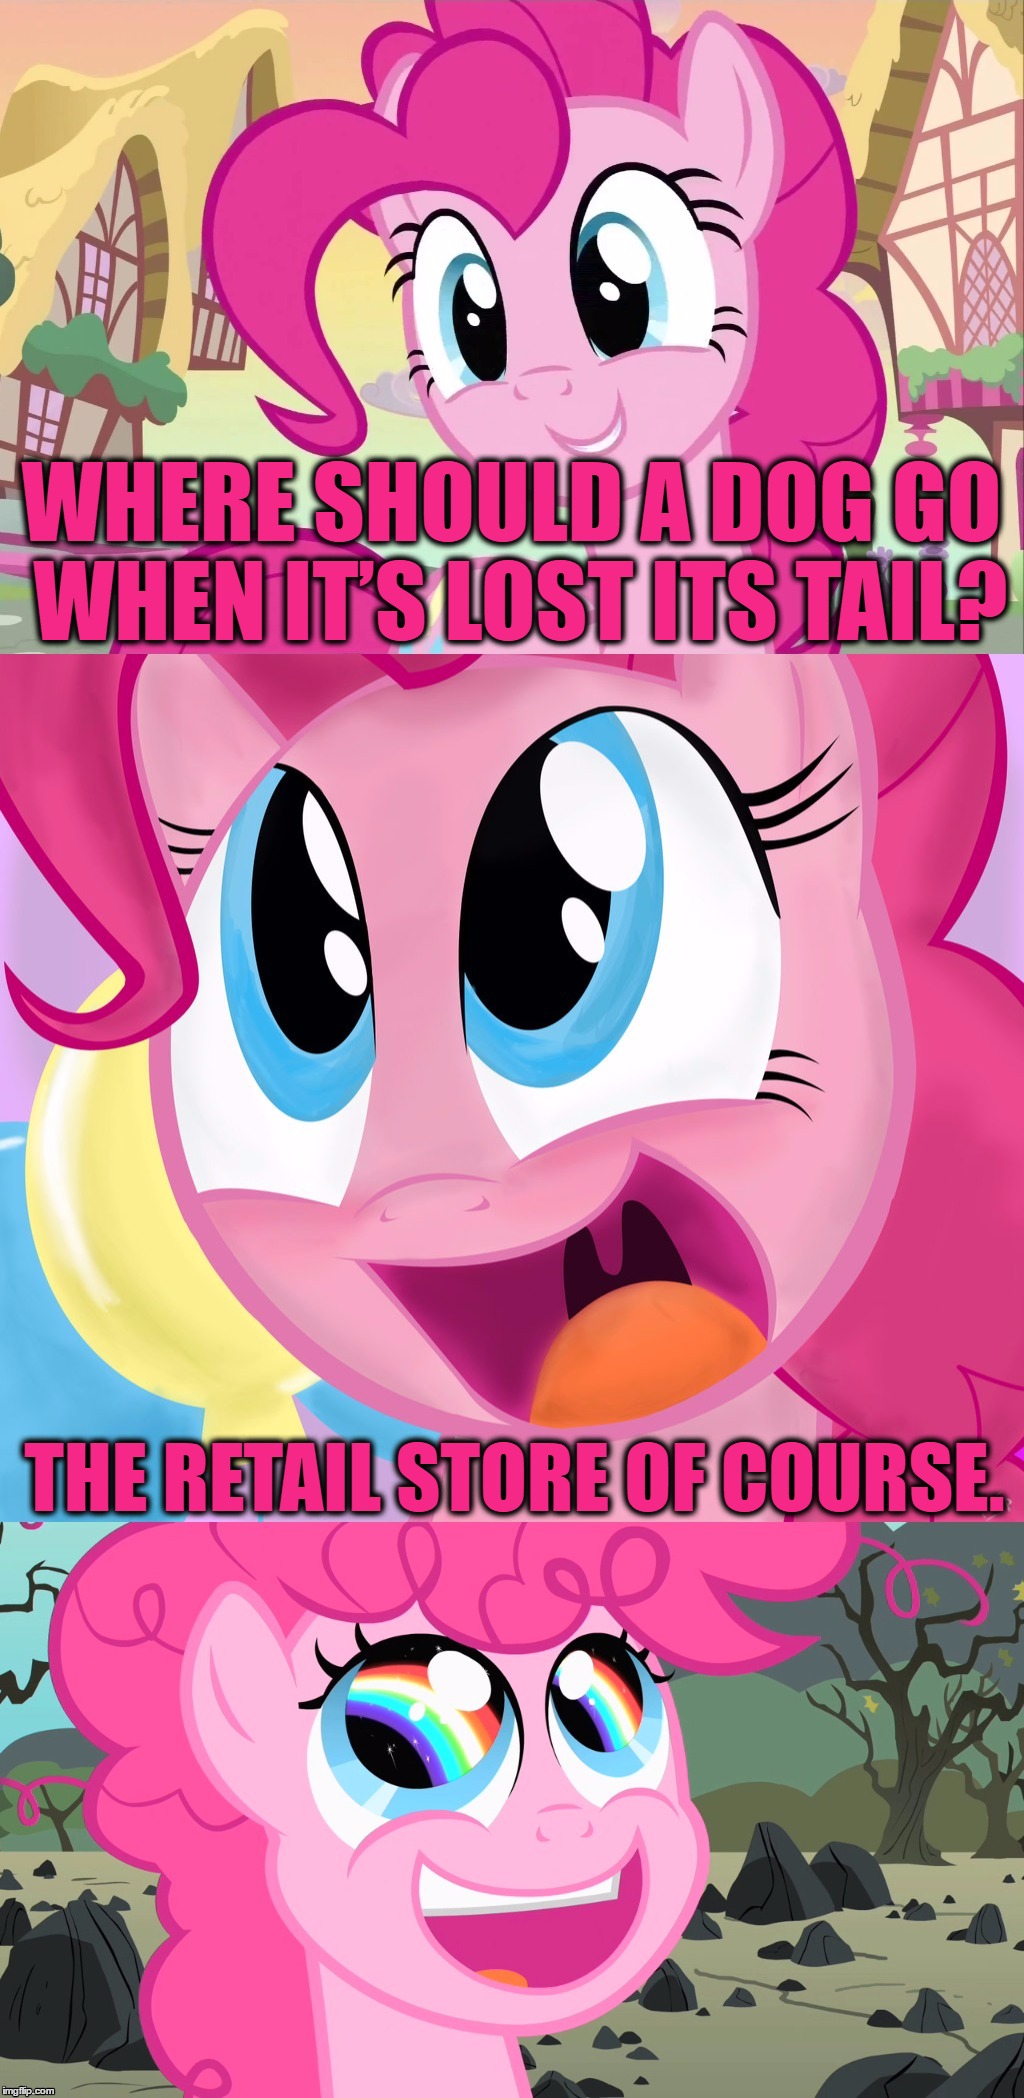 Bad Pun Pinkie Pie | WHERE SHOULD A DOG GO WHEN IT’S LOST ITS TAIL? THE RETAIL STORE OF COURSE. | image tagged in bad pun pinkie pie,mlp,my little pony,pinkie pie,memes,bad pun | made w/ Imgflip meme maker